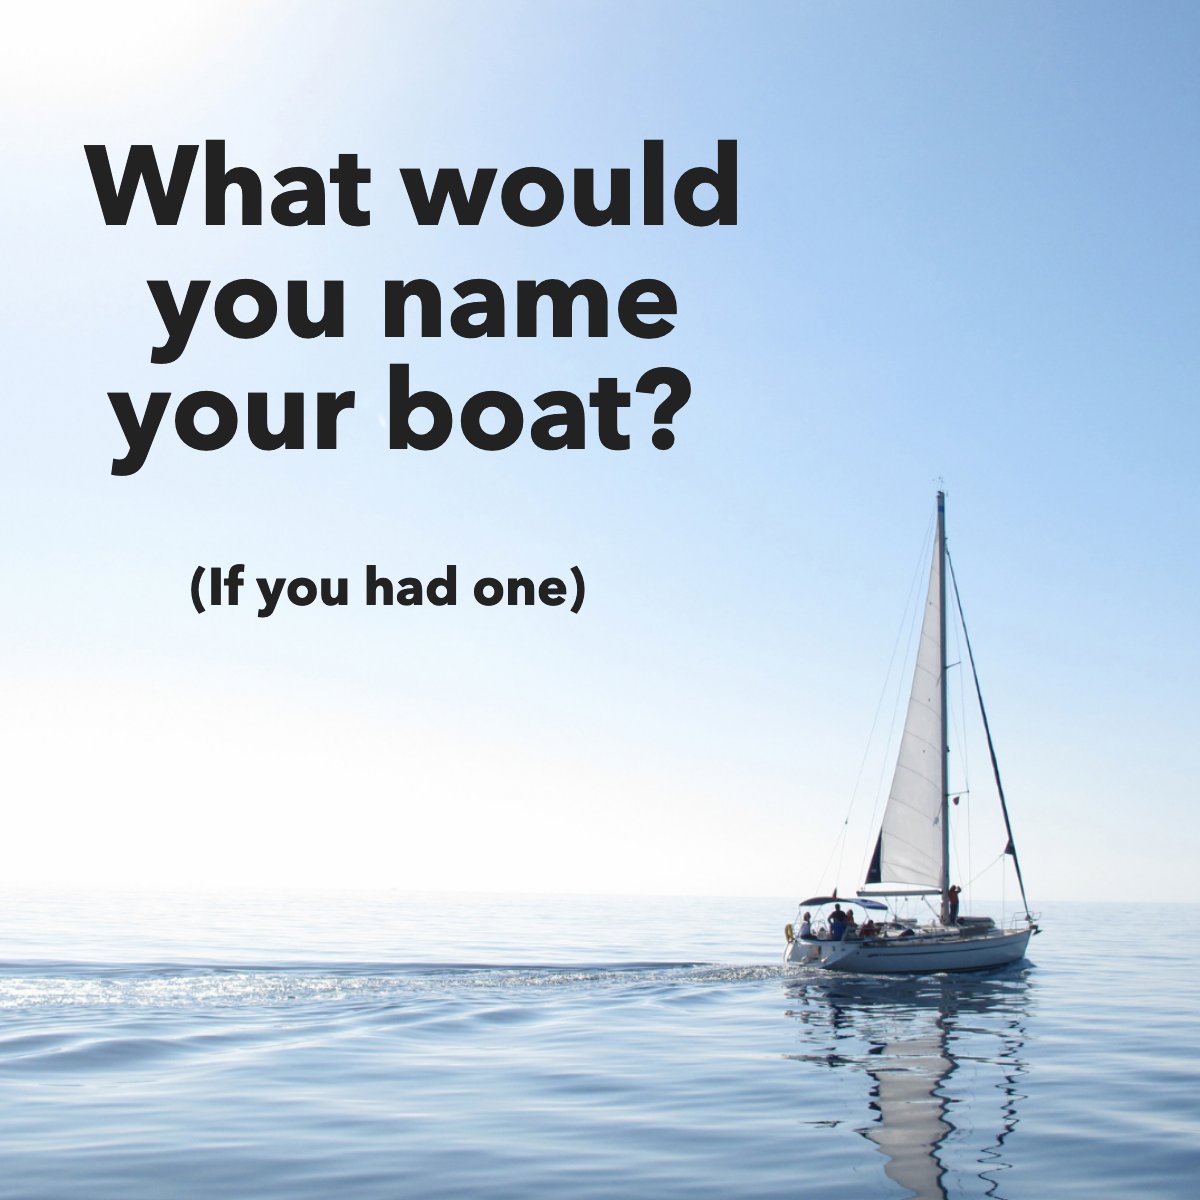 Naming boats after famous songs, movies, or other cultural arts you love is acceptable and entertaining. 😆😉

#boatrip  #boatinglife  #boats  #ocean  #searayboats  #boatfishing
#movingtotexas #movingtotexasfromcalifornia #texashomes #texashome #texashomesforsale